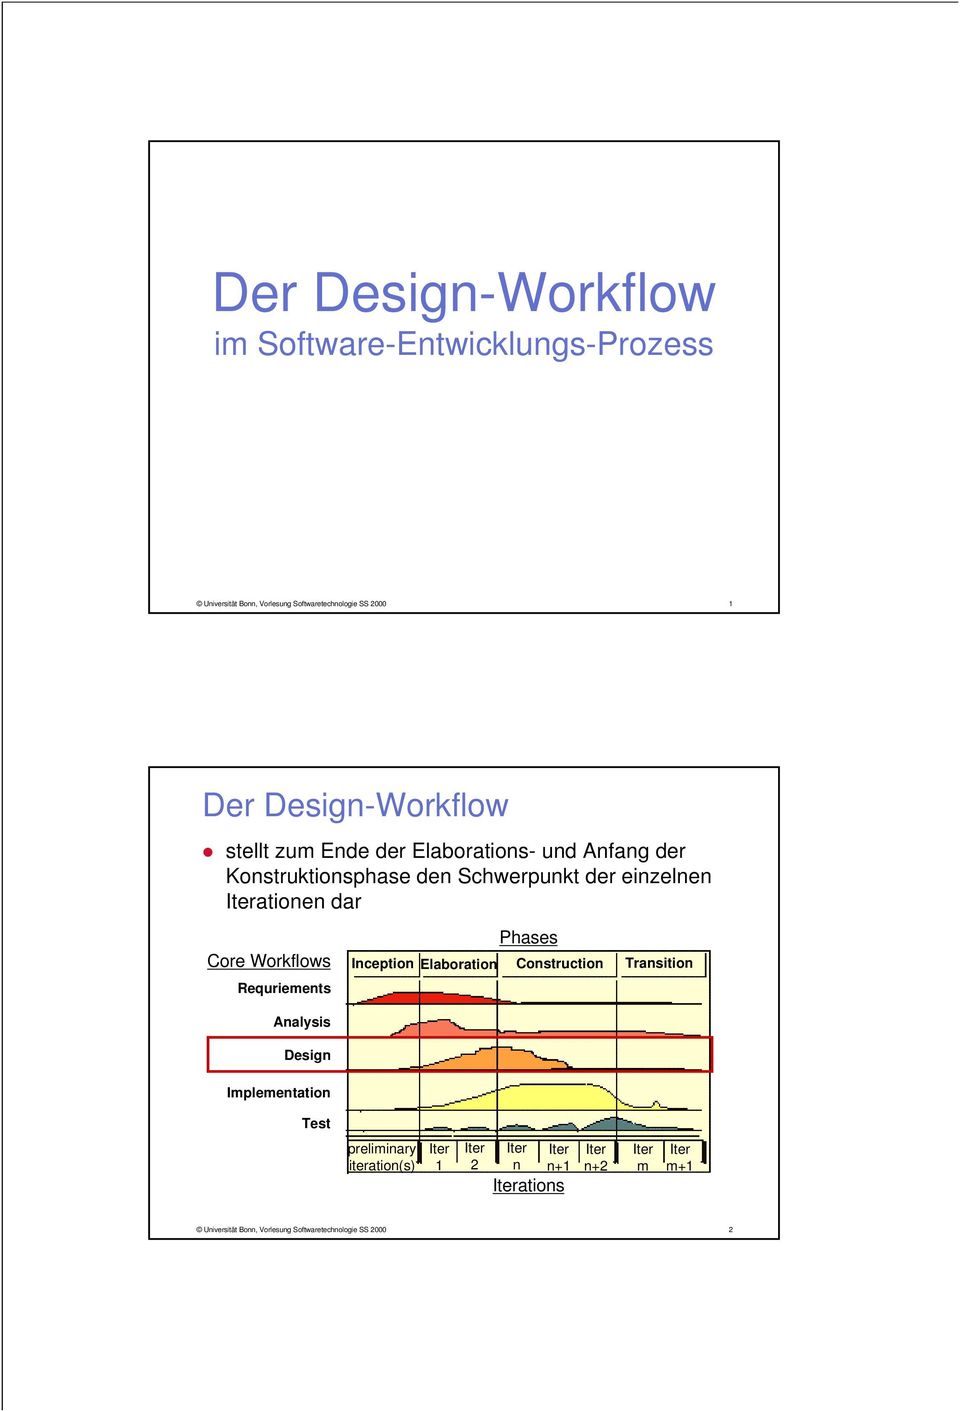 Workflows Requriements Analysis Implementation Phases Inception Elaboration Construction Transition preliminary